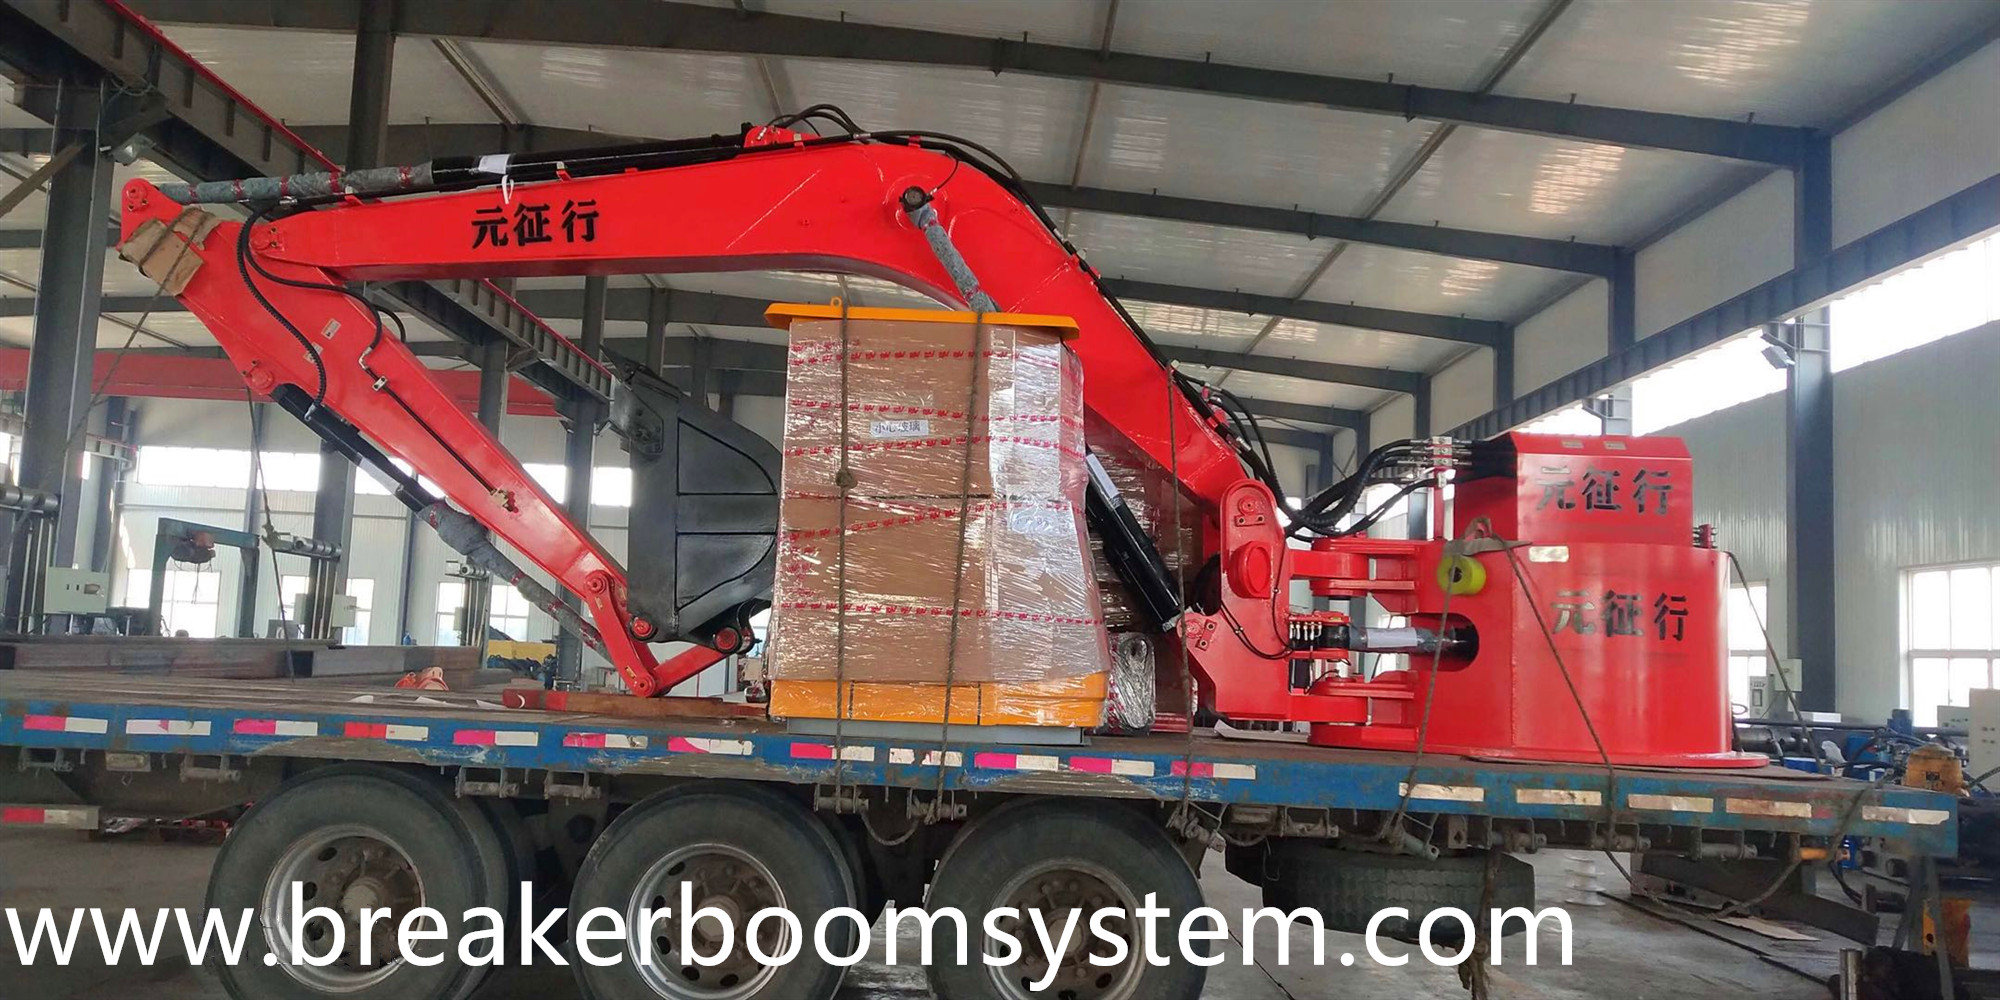 Round Pedestal Hydraulic Rock Breaker Booms System Has Been Delivered On April 19th, 2019